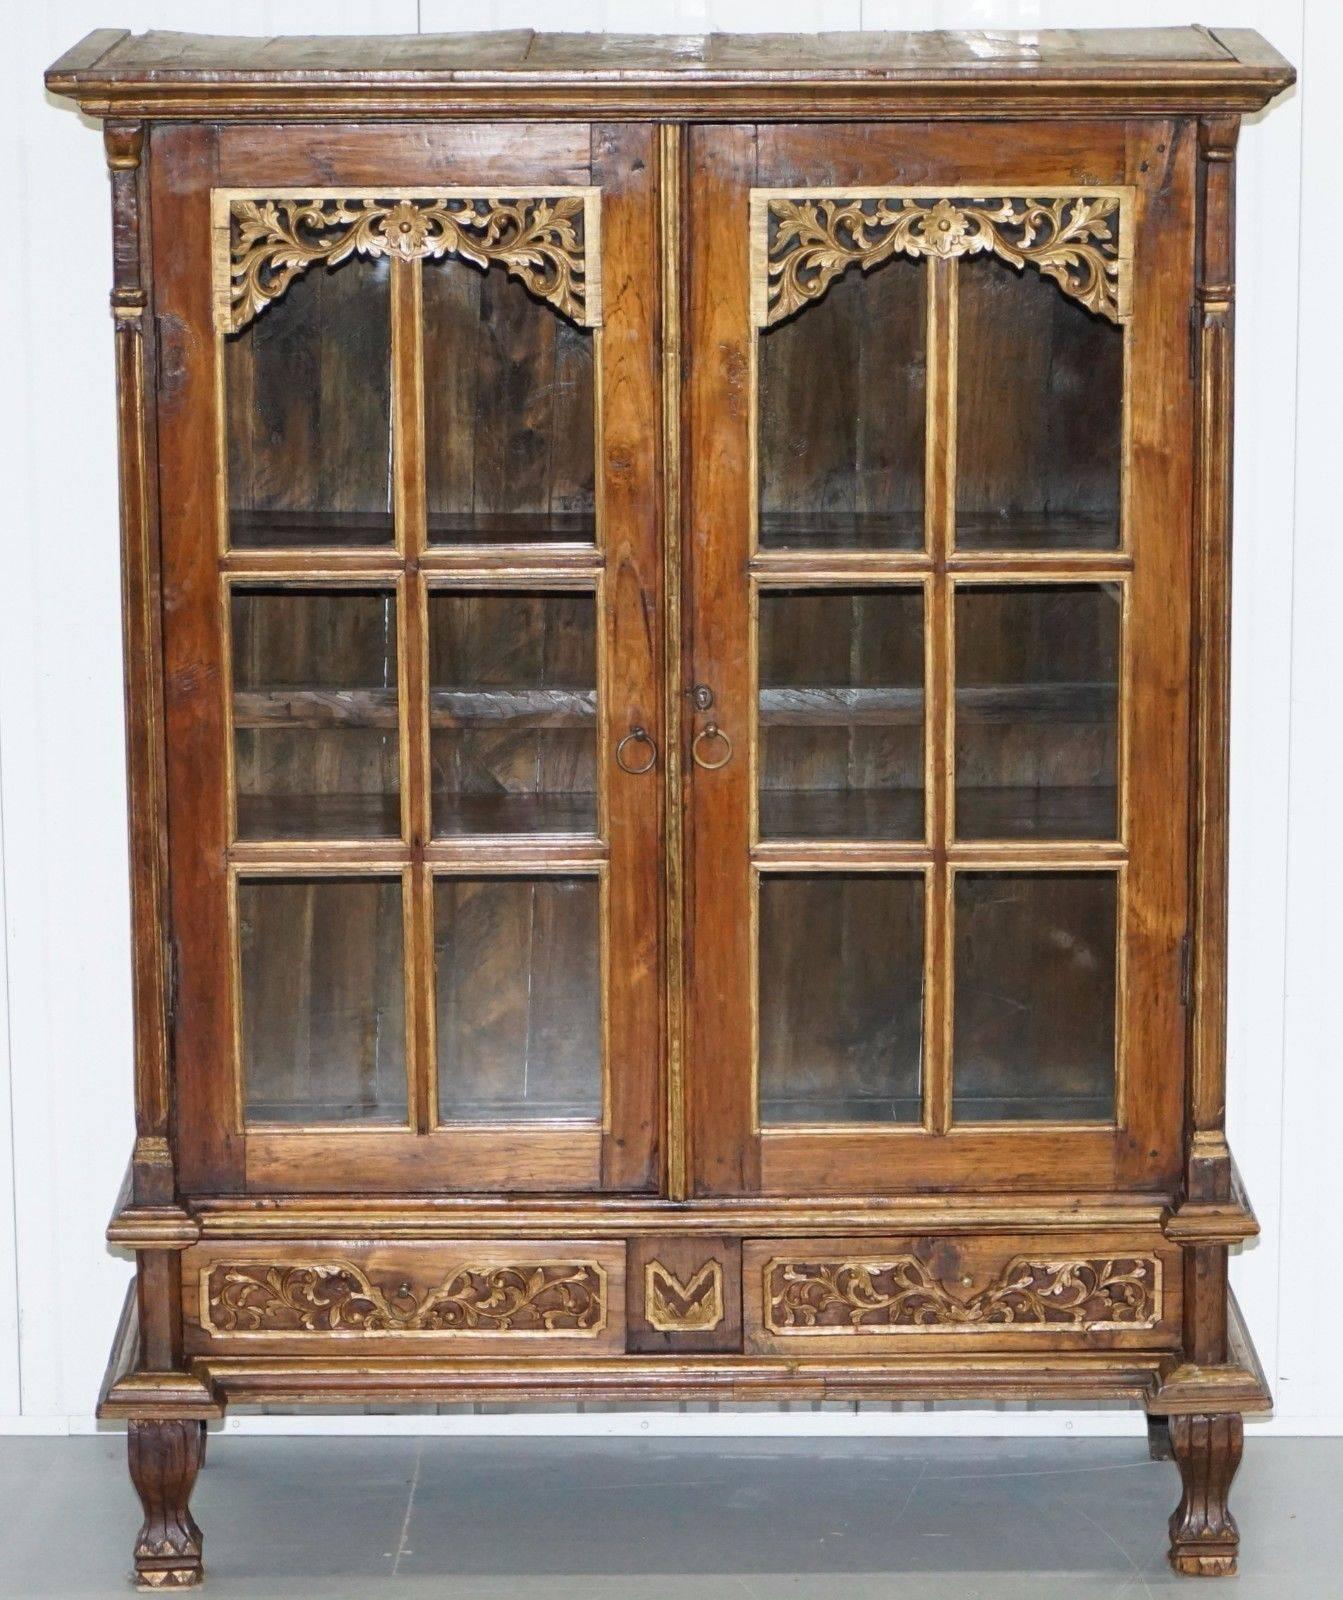 We are delighted to offer for sale this absolutely stunning hand carved French Louis late 18th-early 19th century bookcase display cabinet

A very rare hand-carved piece in stunning period condition, I work with furniture full time and have never